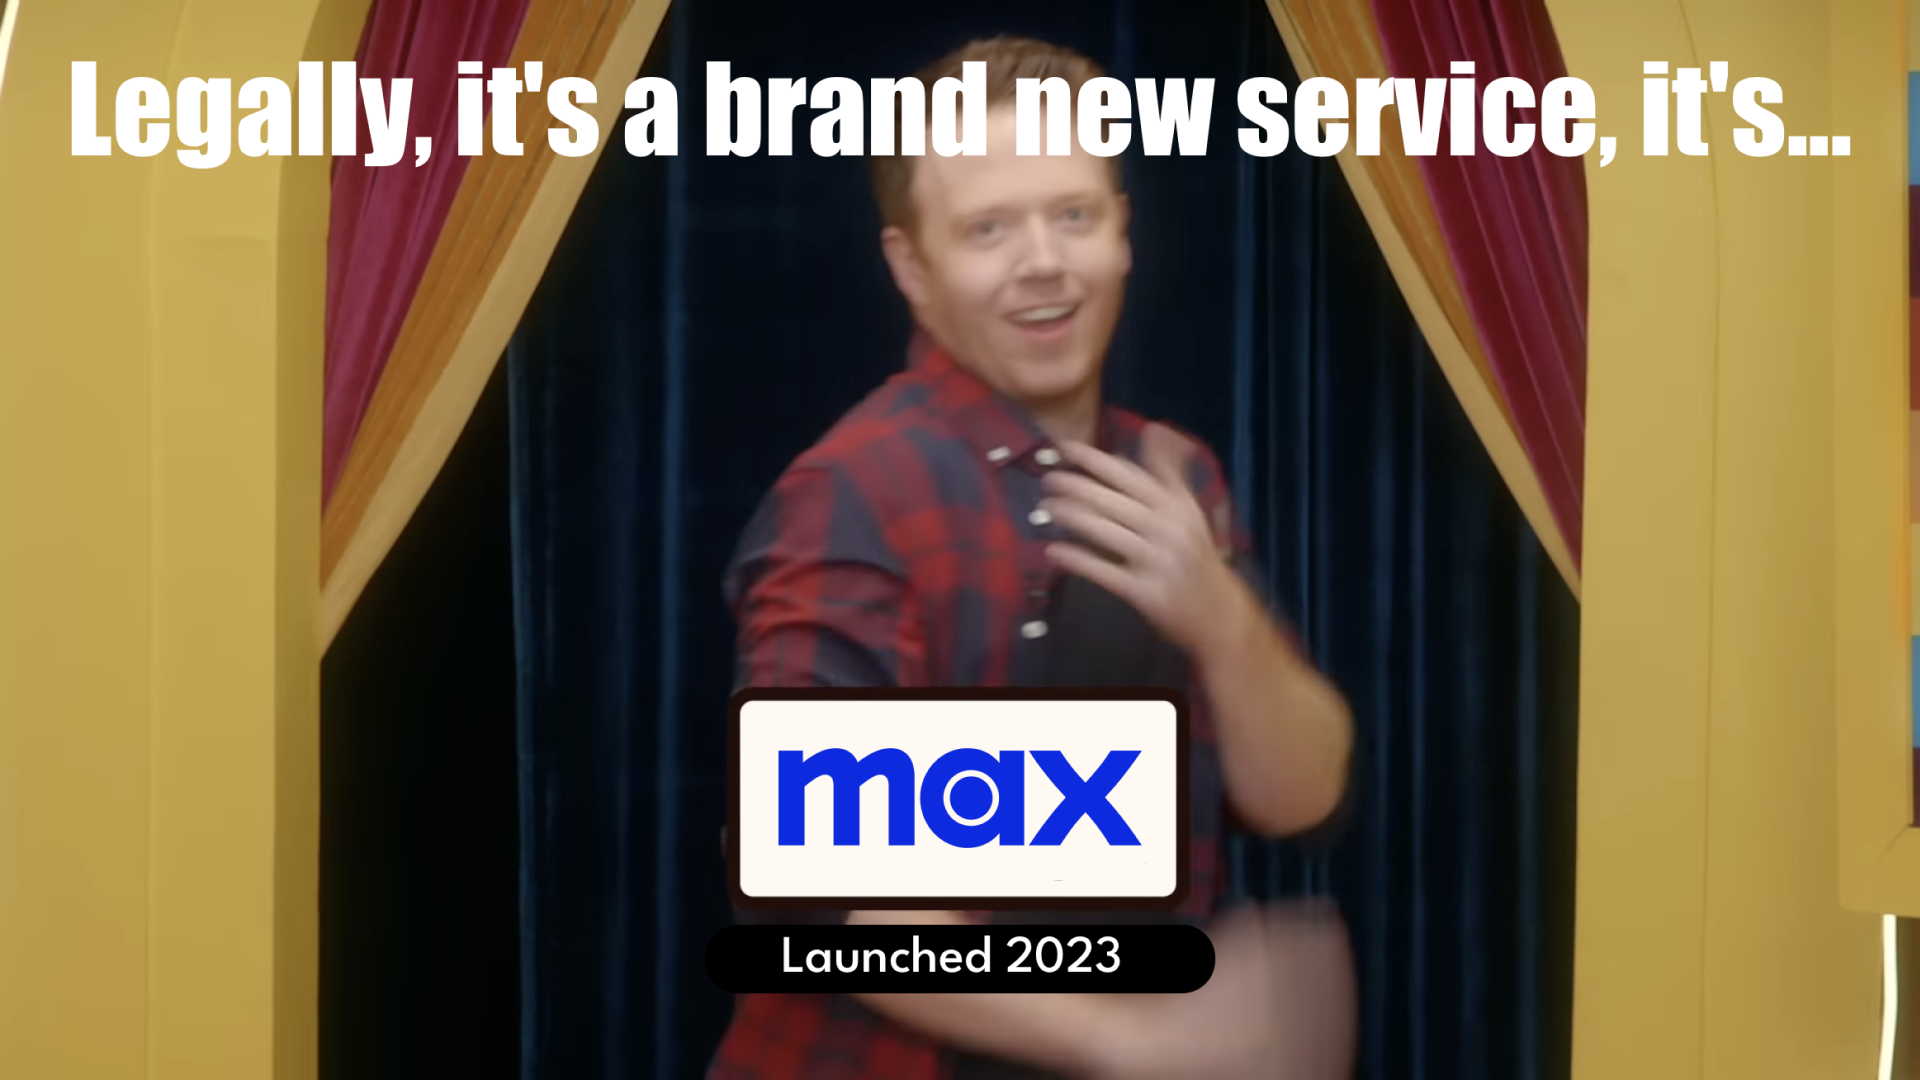 Screenshot with Brennan Lee Mulligan saying: Legally, it's a brand new service, it's Max, launched 2023.